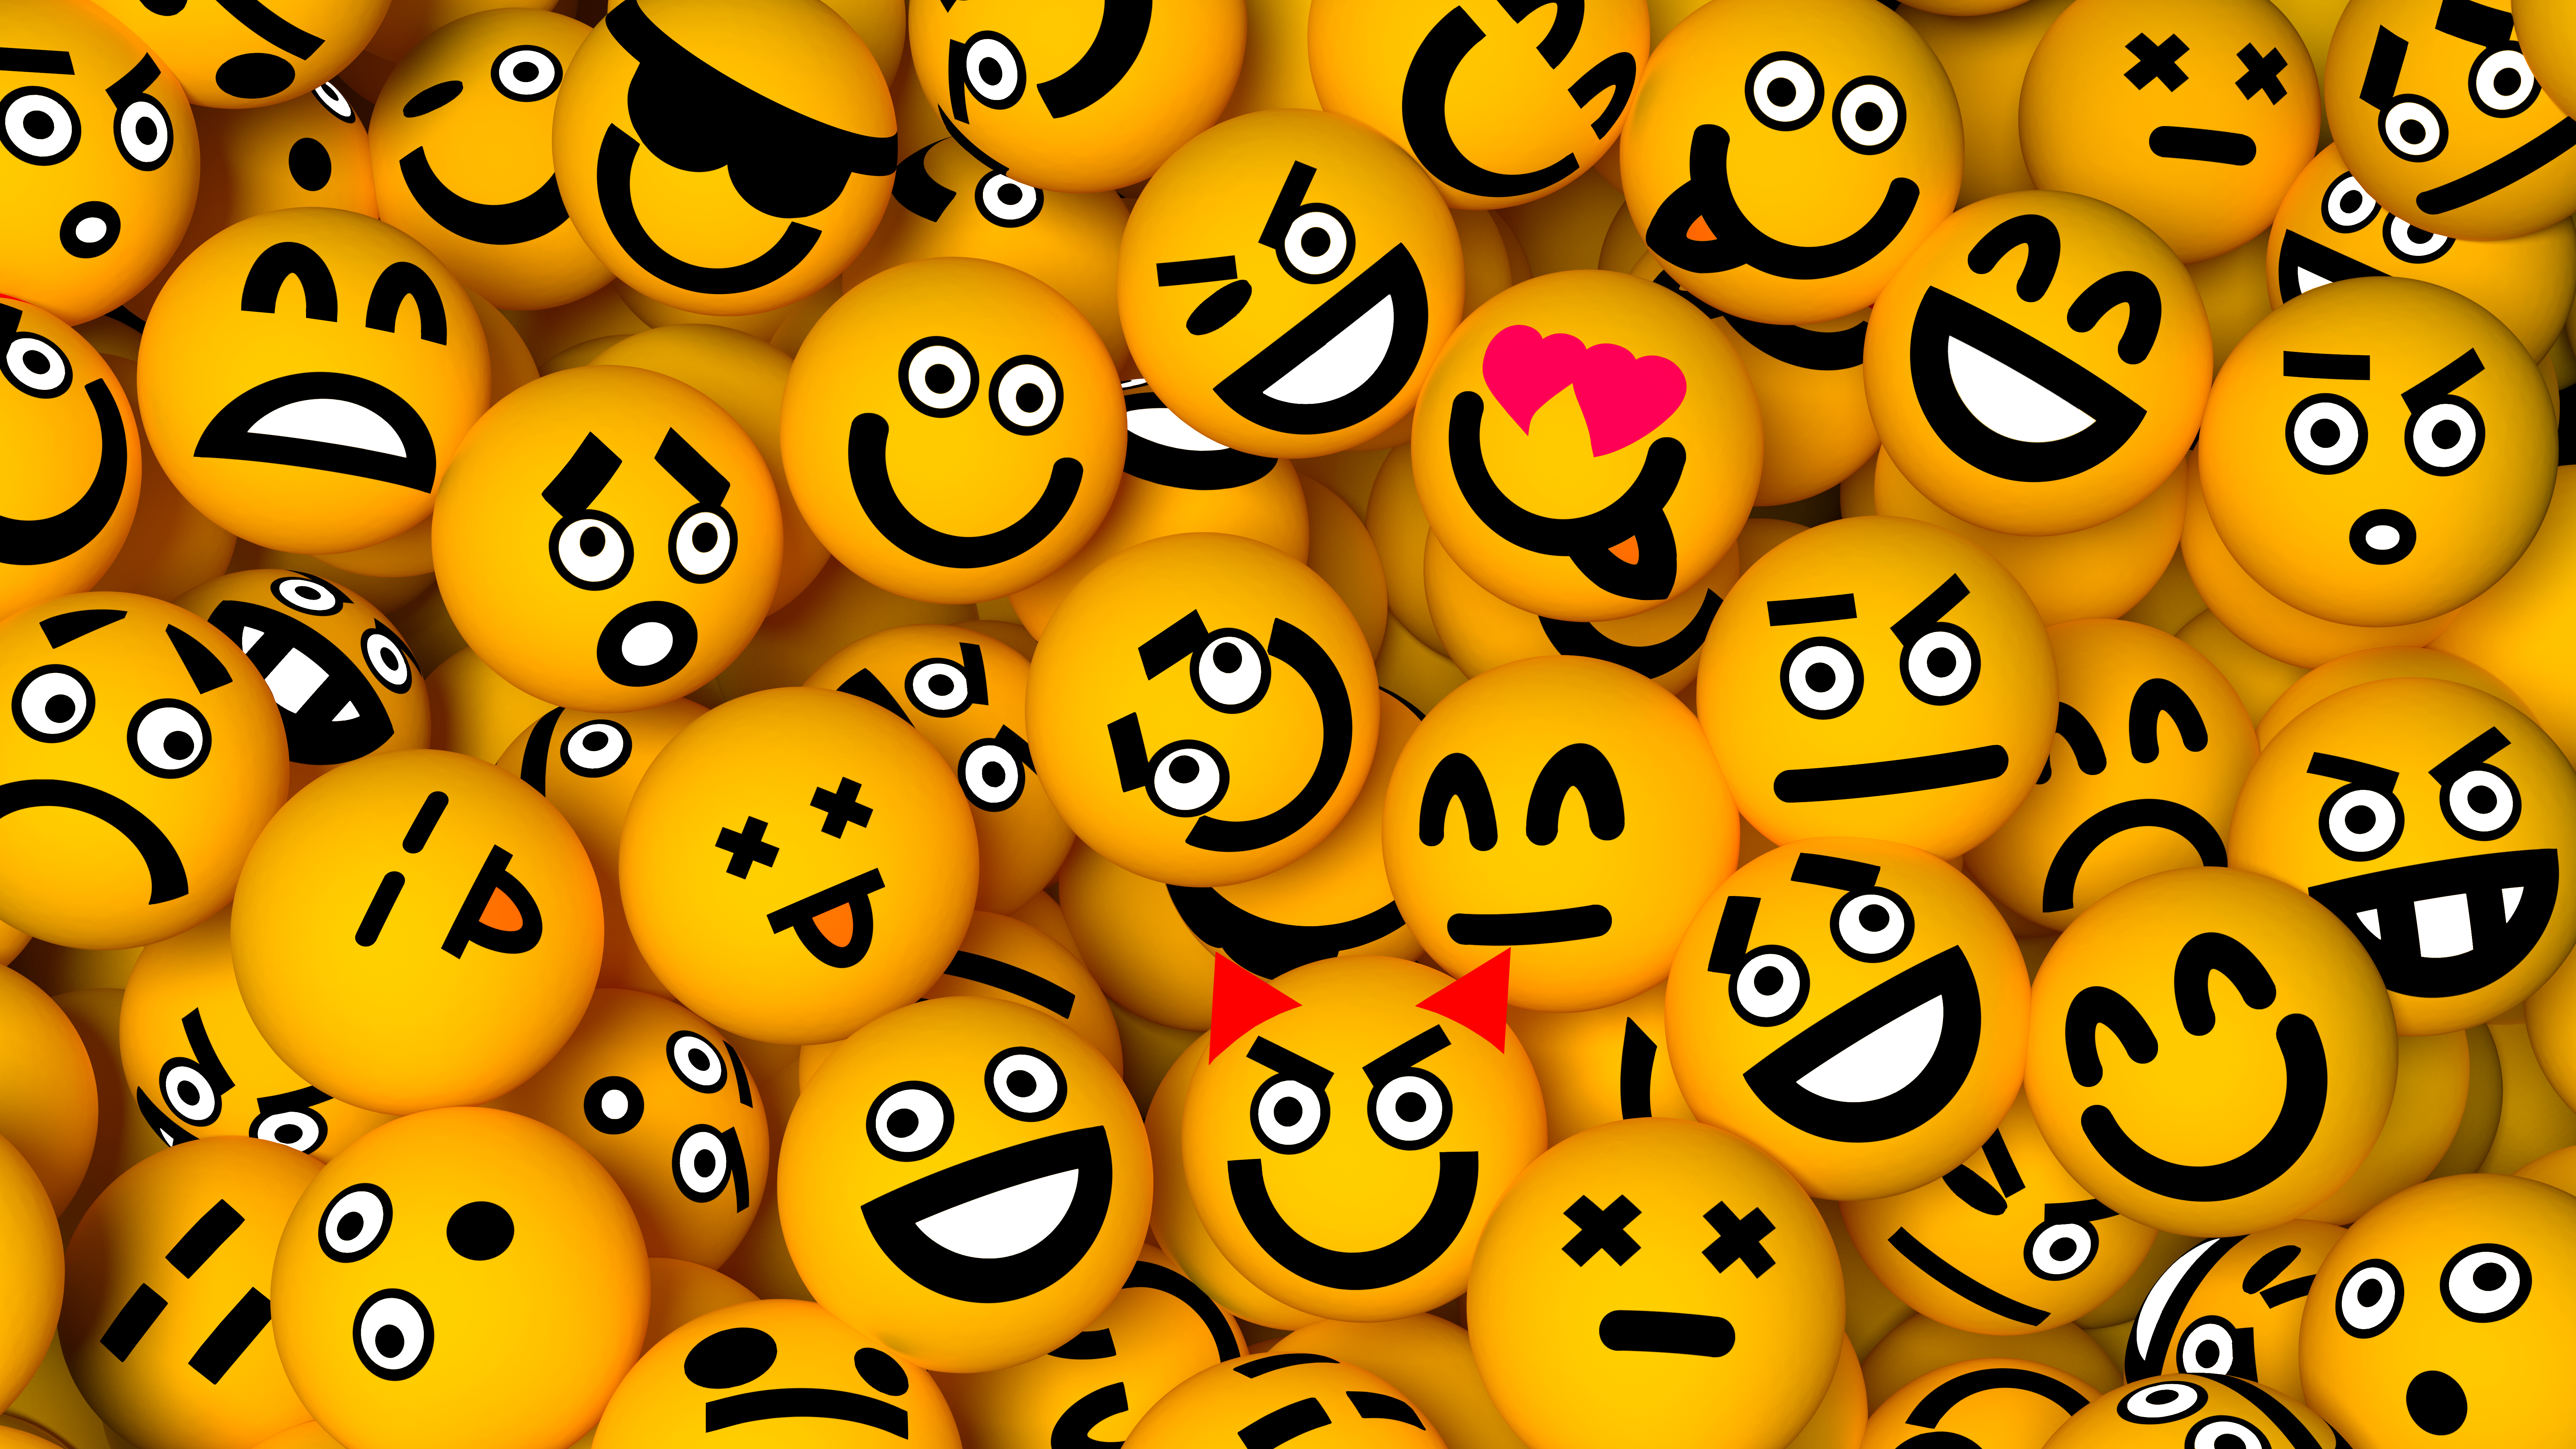 Nice Images Collection: Smileys Desktop Wallpapers